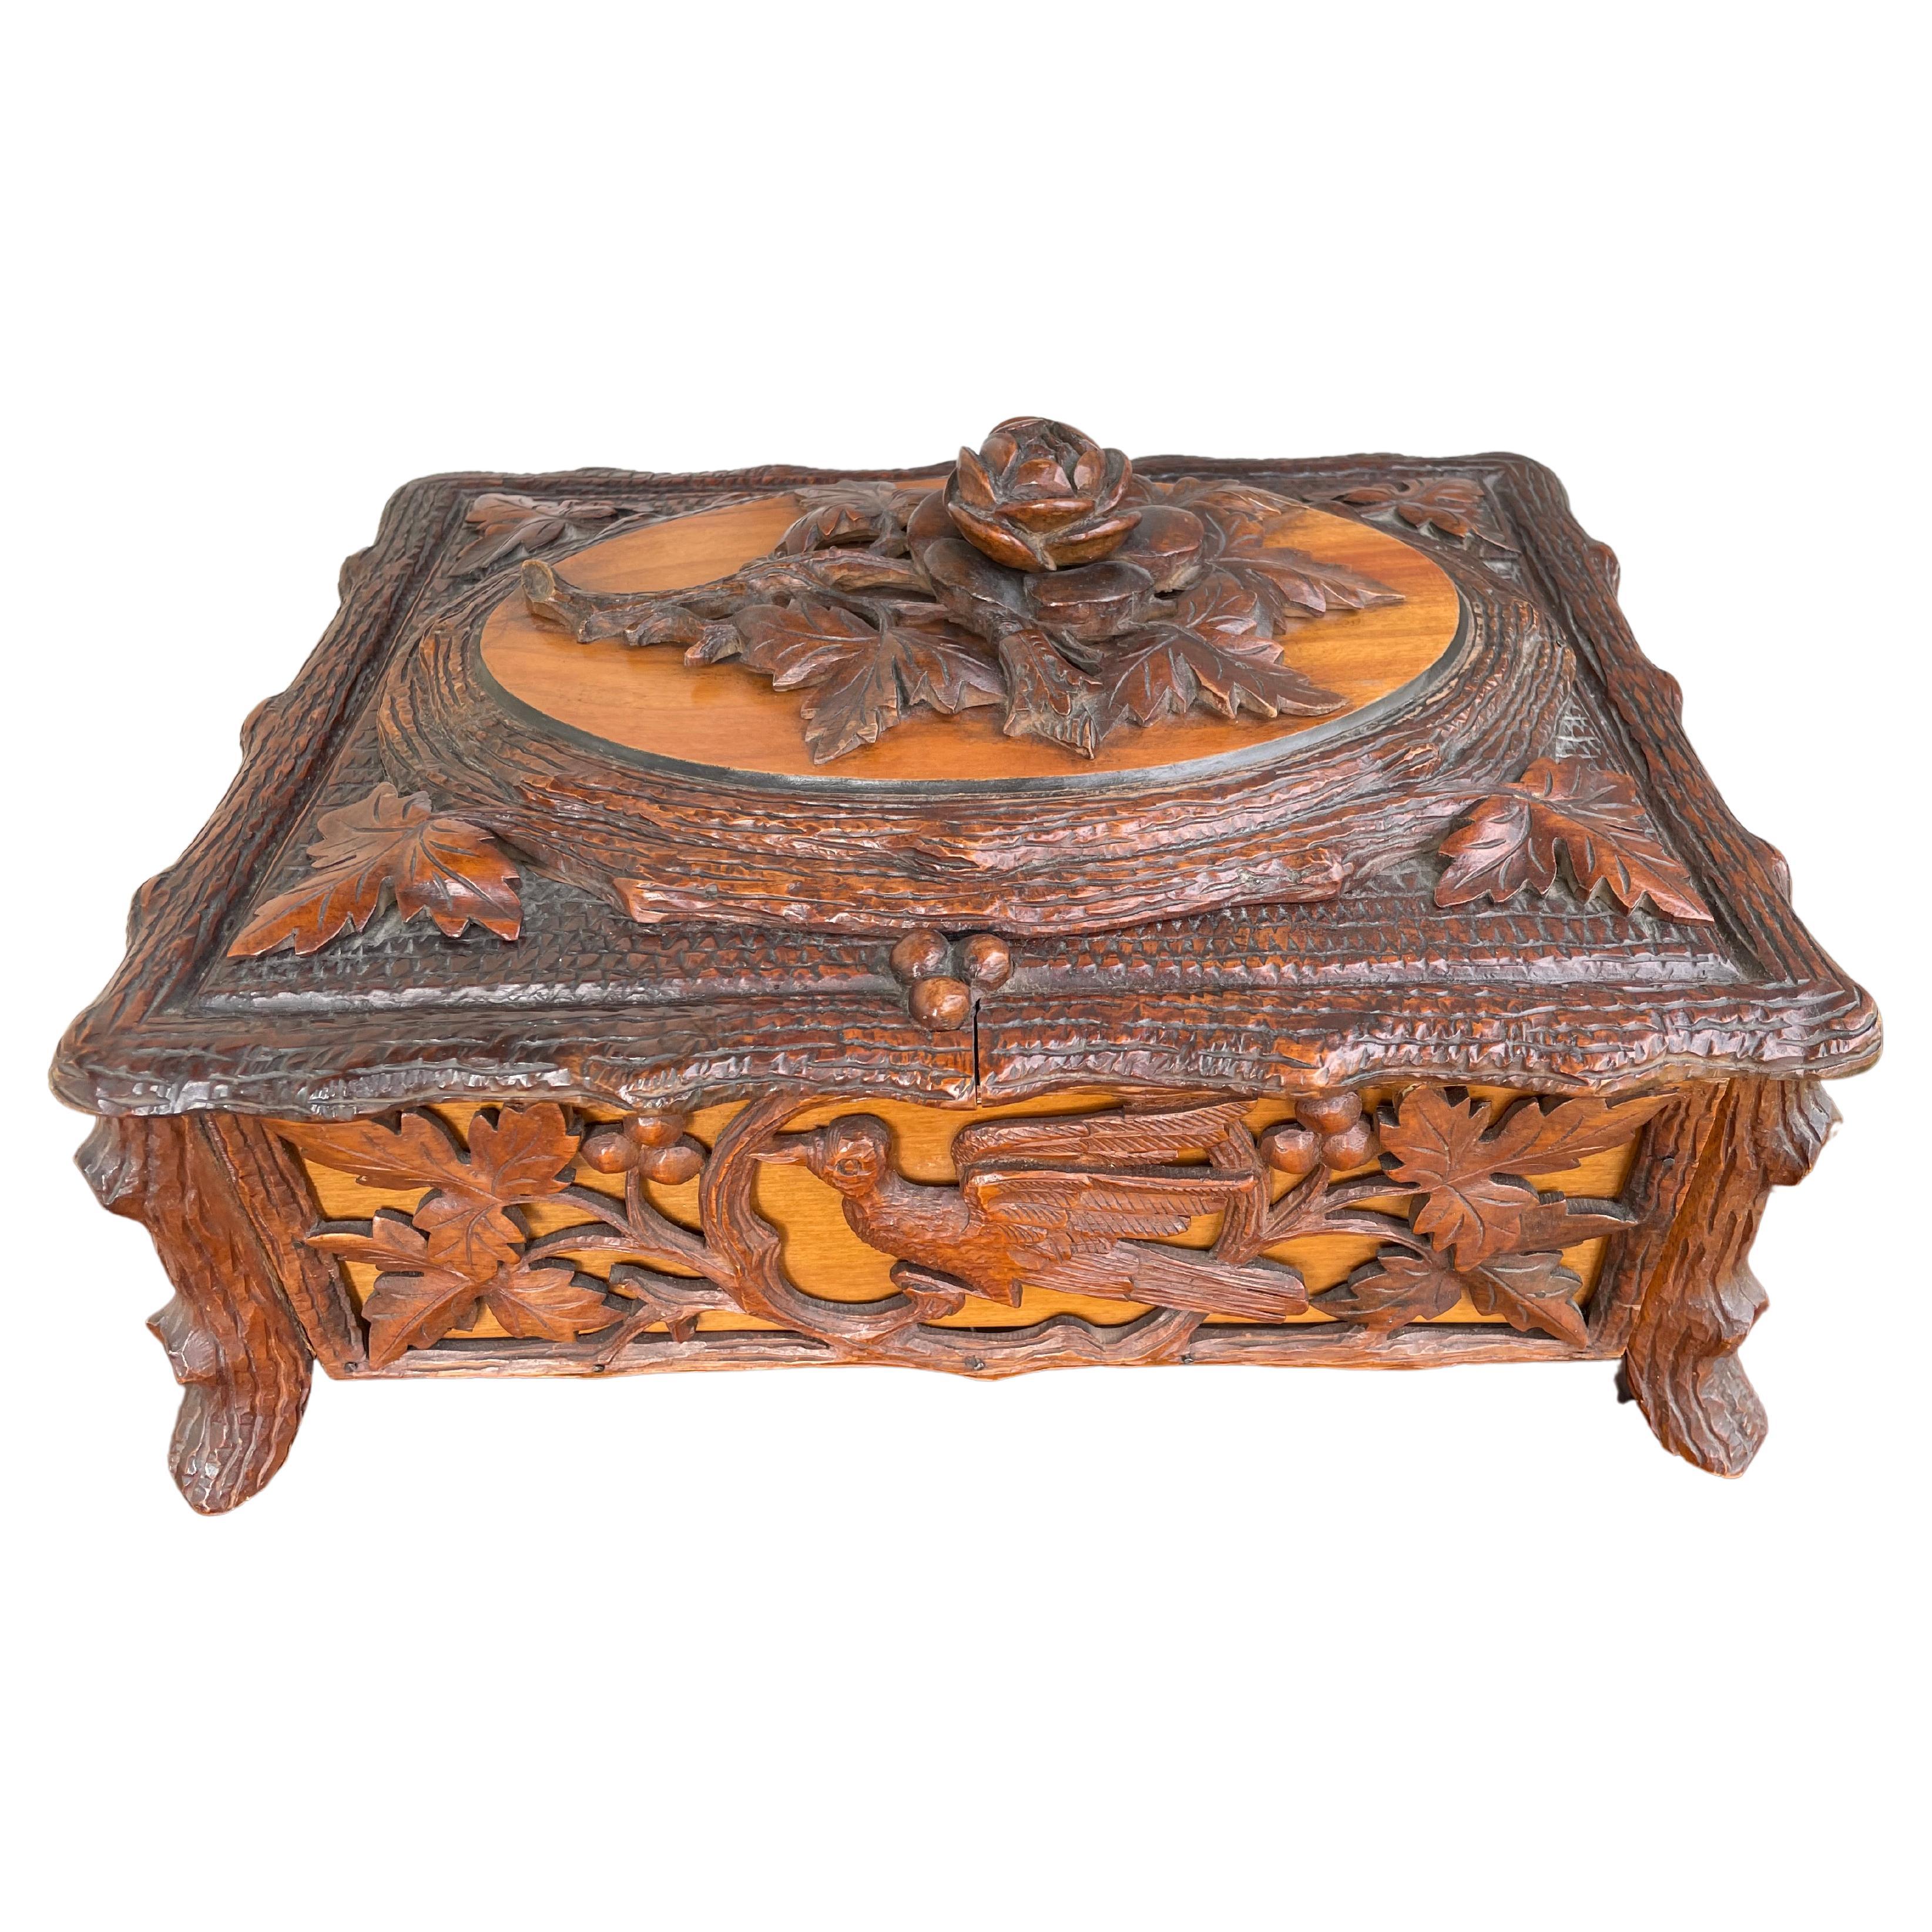 Vintage Handcrafted Rustic Wooden Decorative Ring Case Hand Carved Jewelry Box With Inlaid Floral Designed Hinged Lid